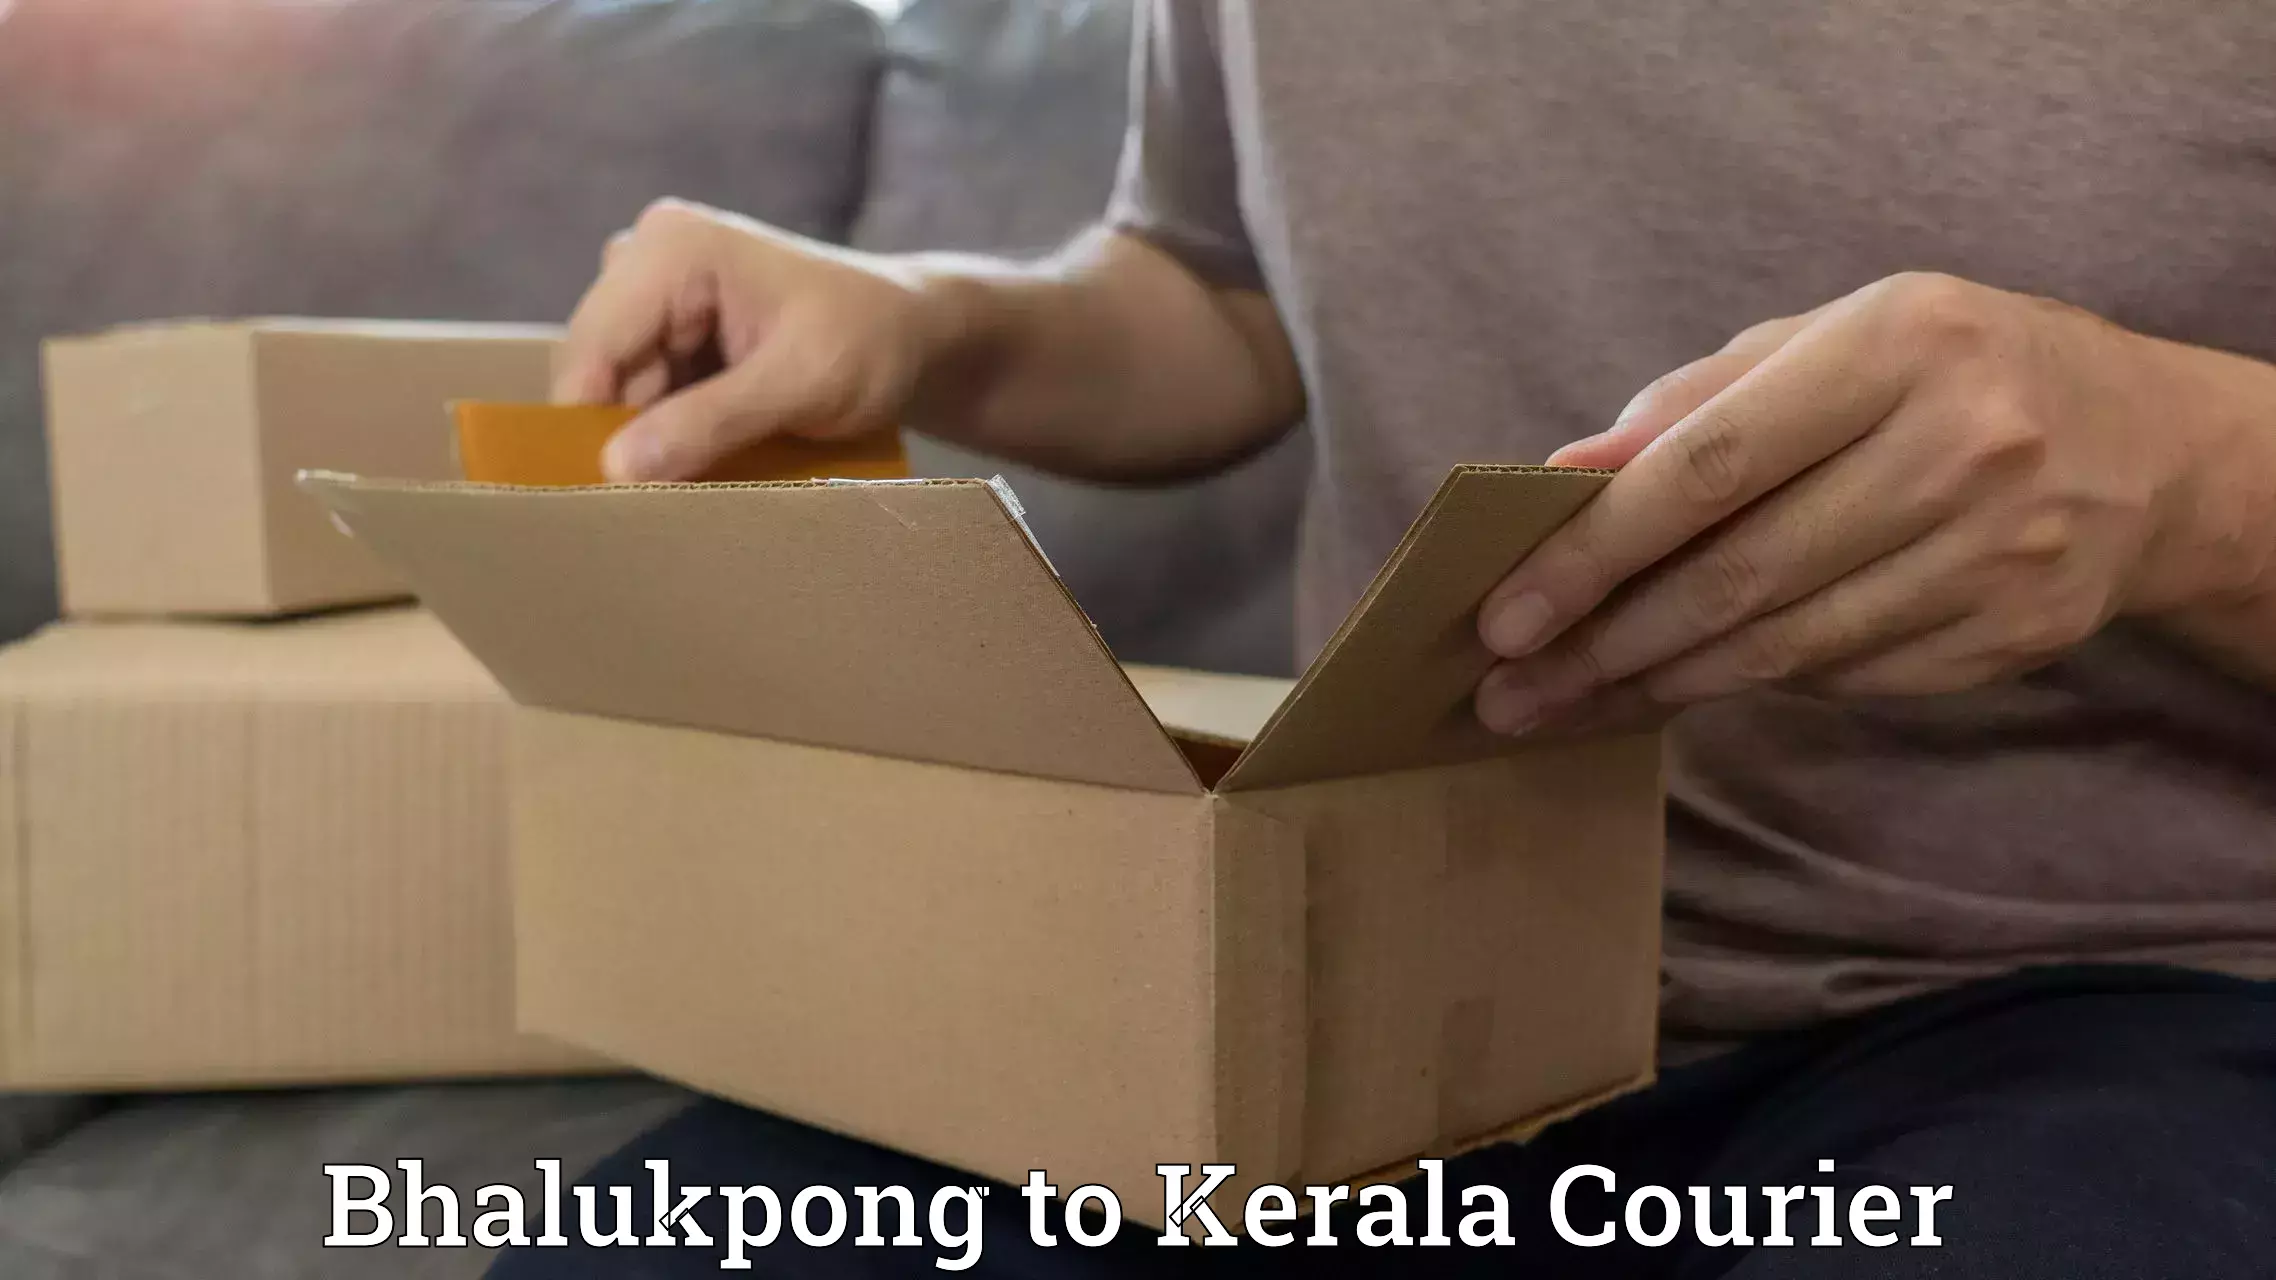 24/7 shipping services Bhalukpong to Kottayam